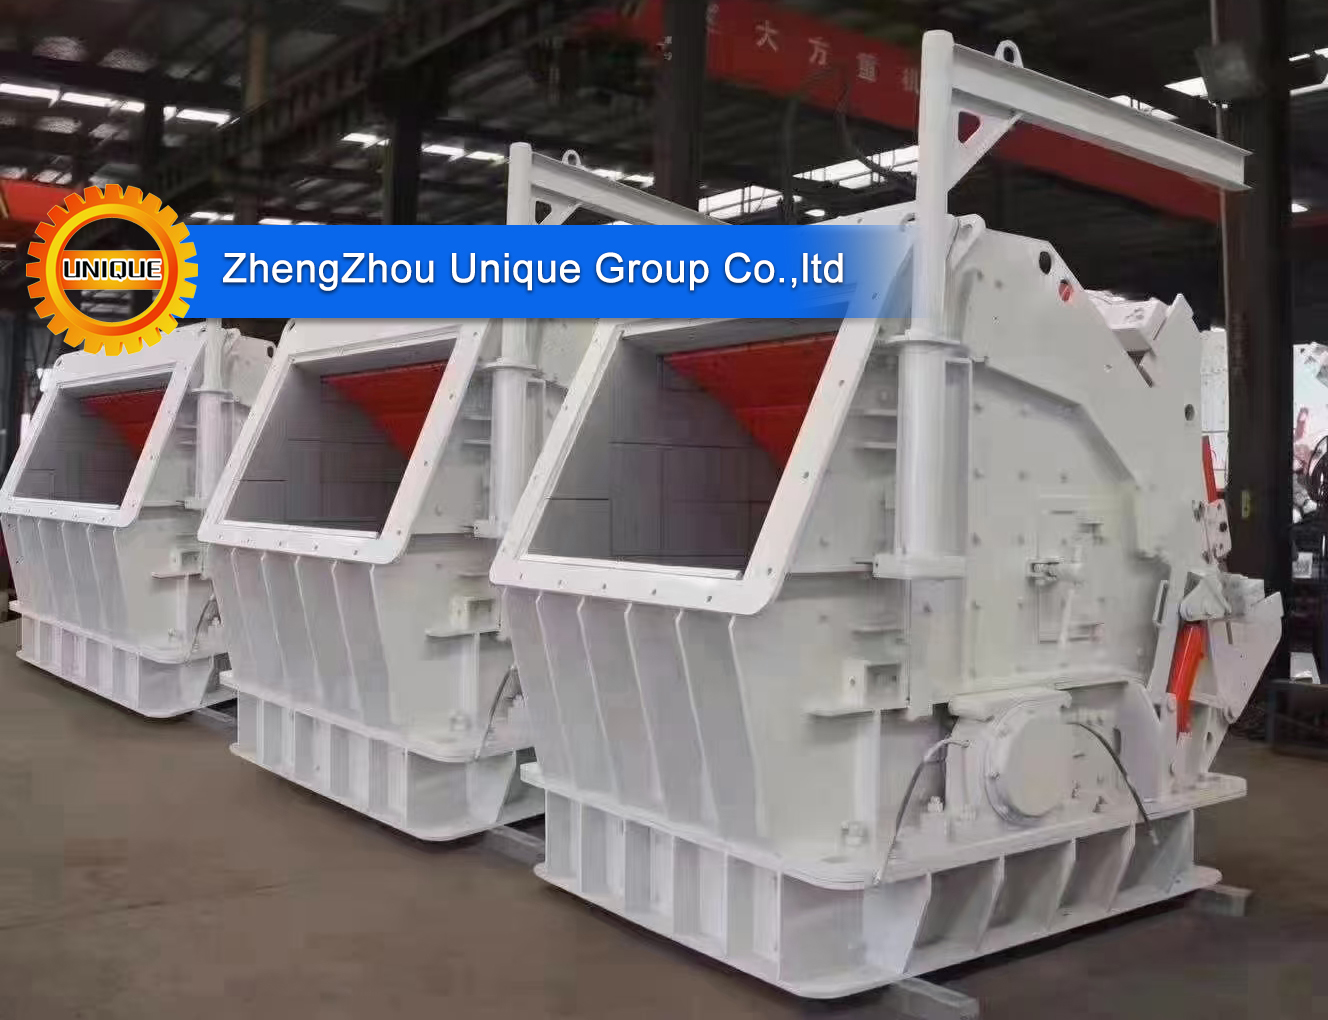 How to choose between cone crusher and impact crusher?